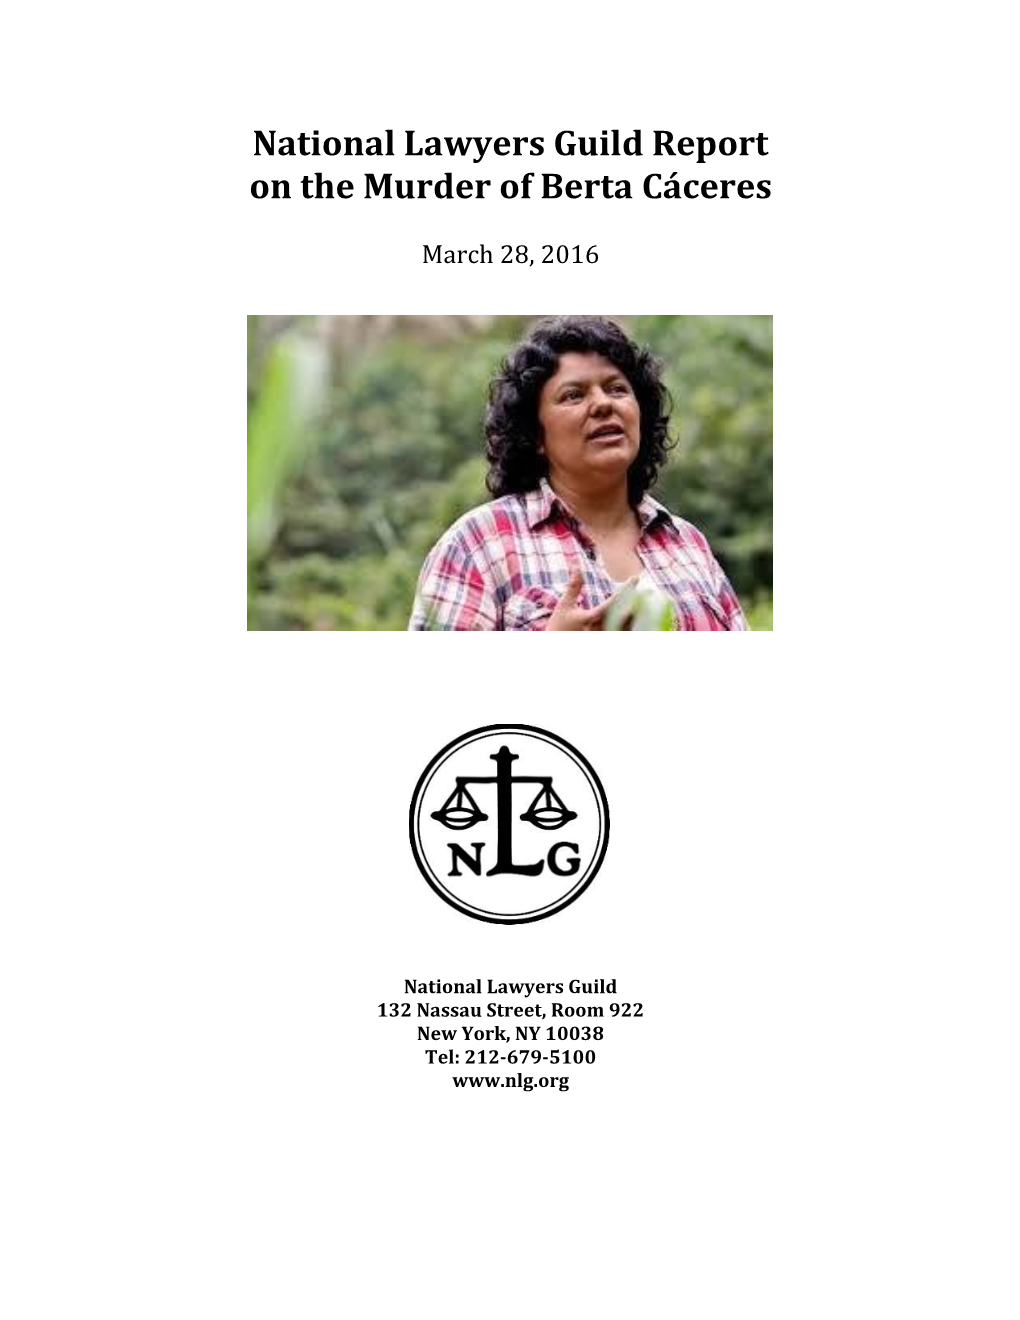 NLG Report on the Murder of Berta Caceres